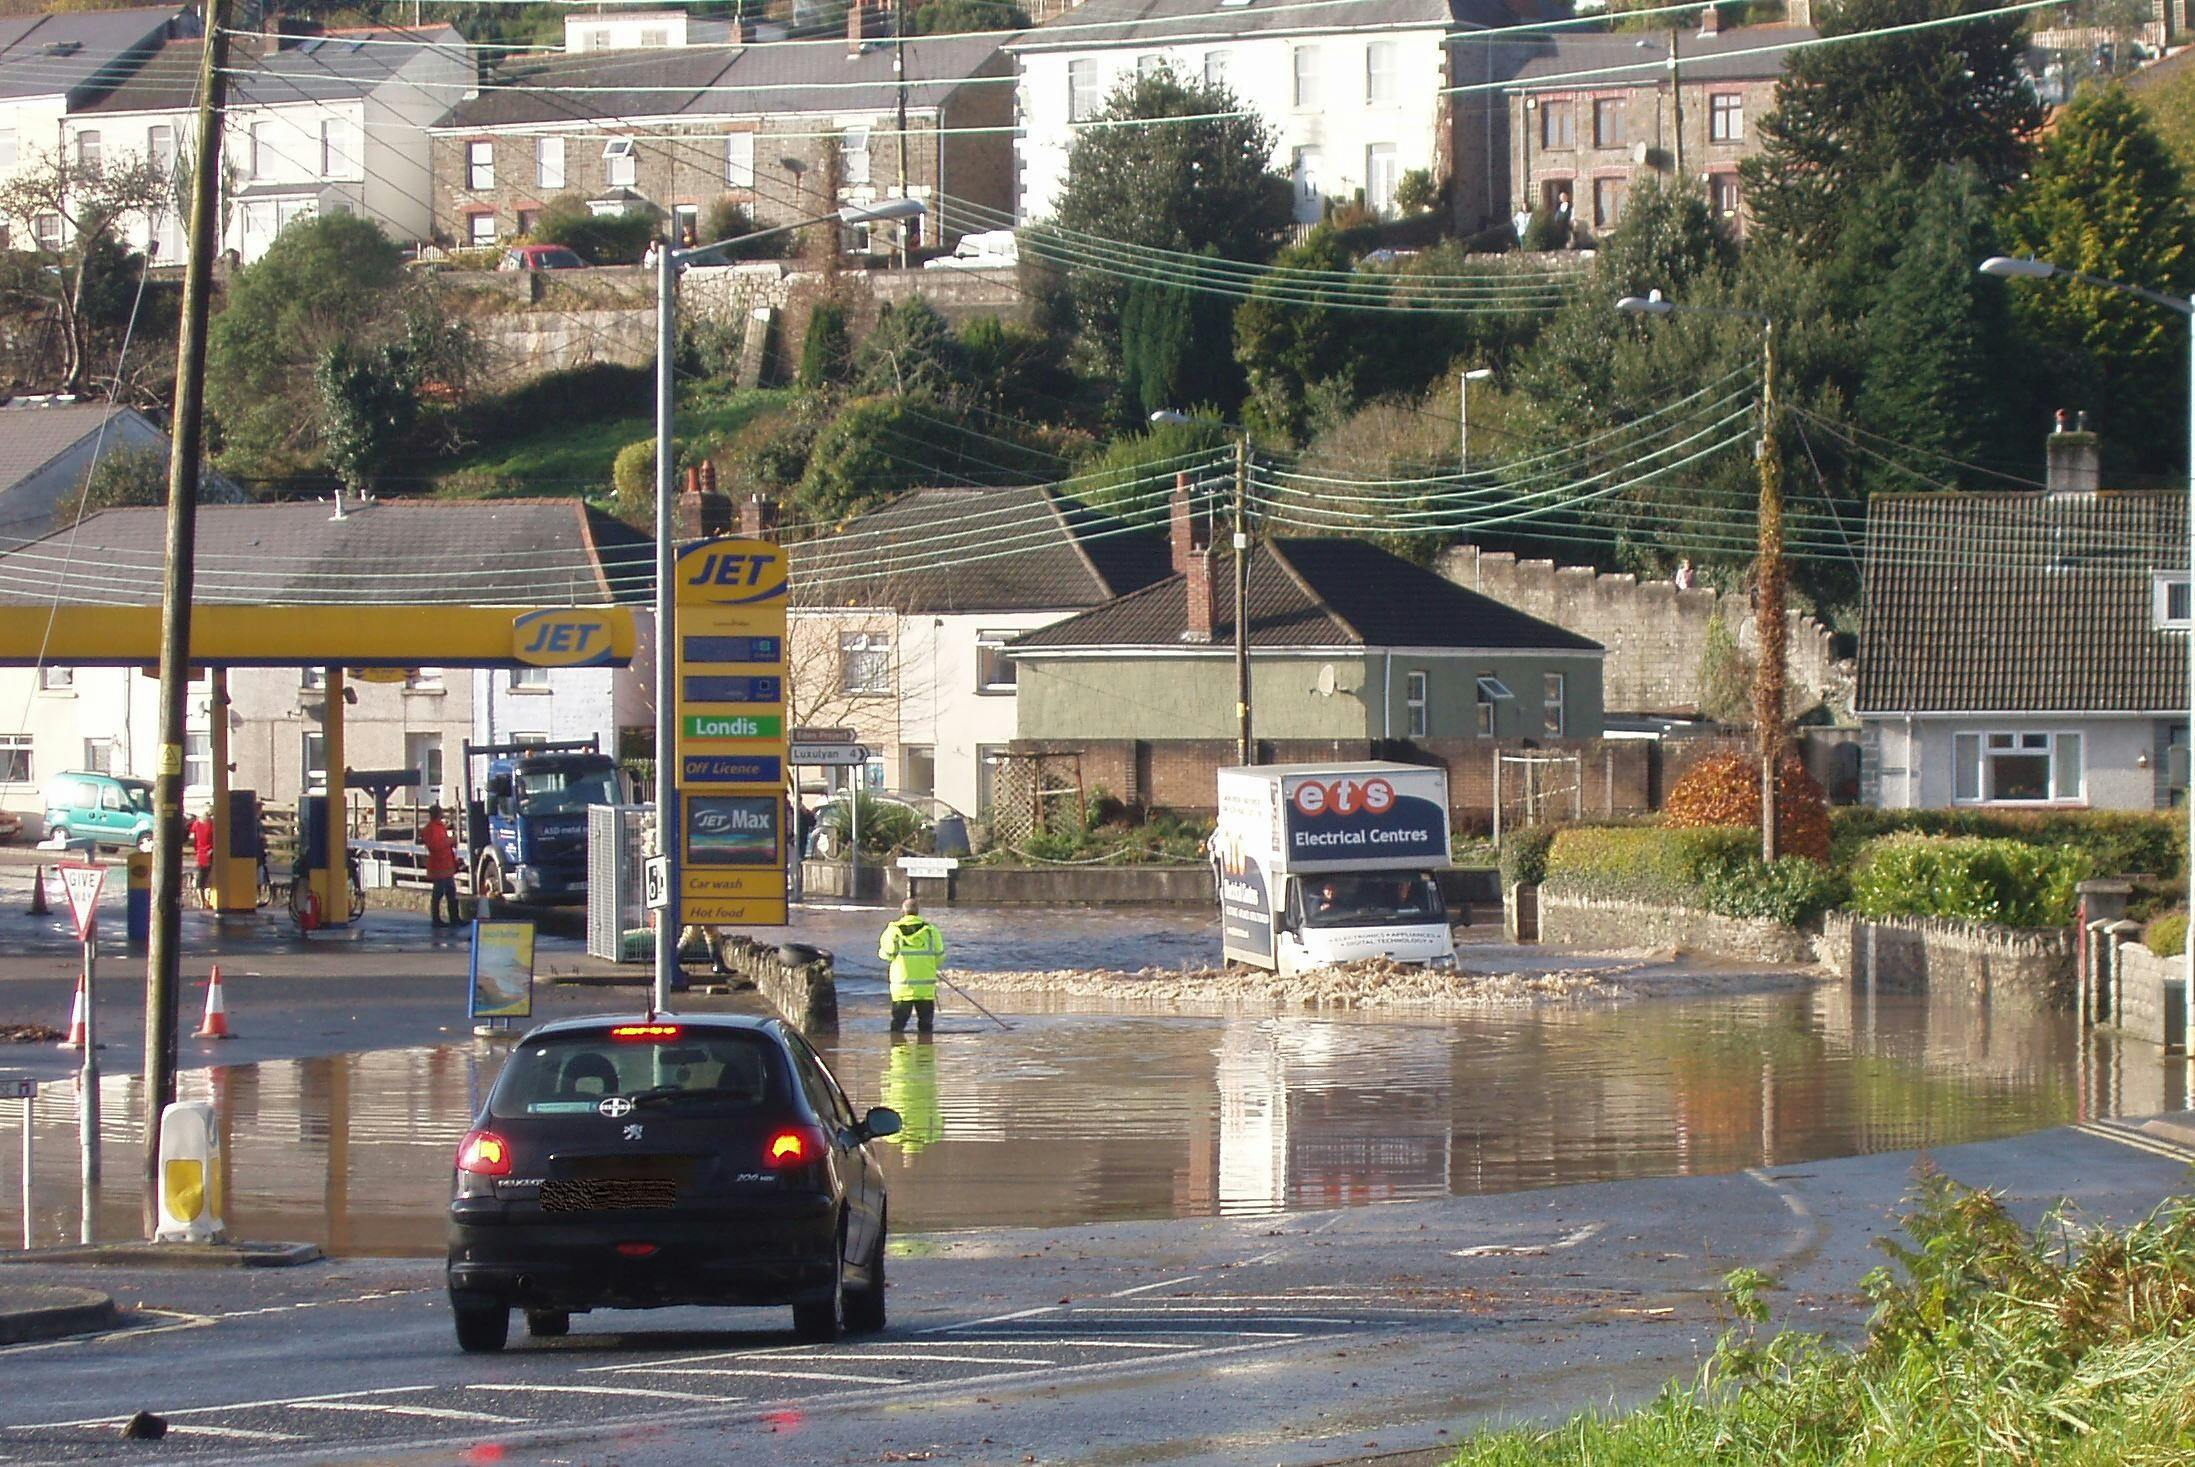 Deep flood water covering the A390 in front of the Jet garage.